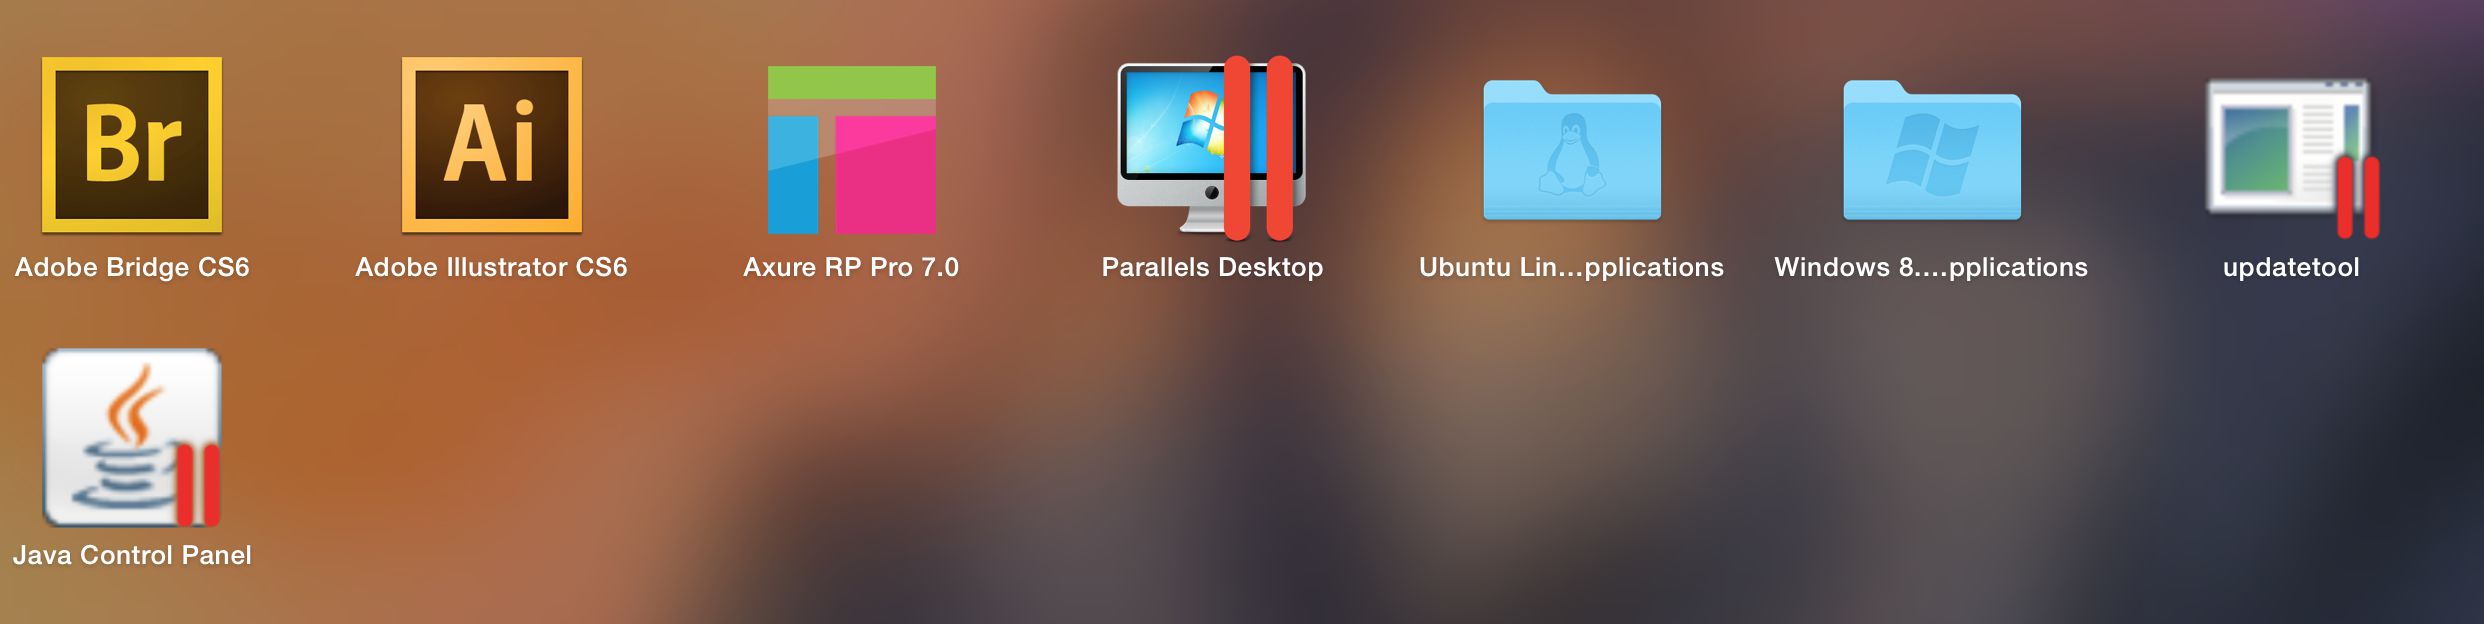 parallels for mac left $recycle.bin on desktop that i can